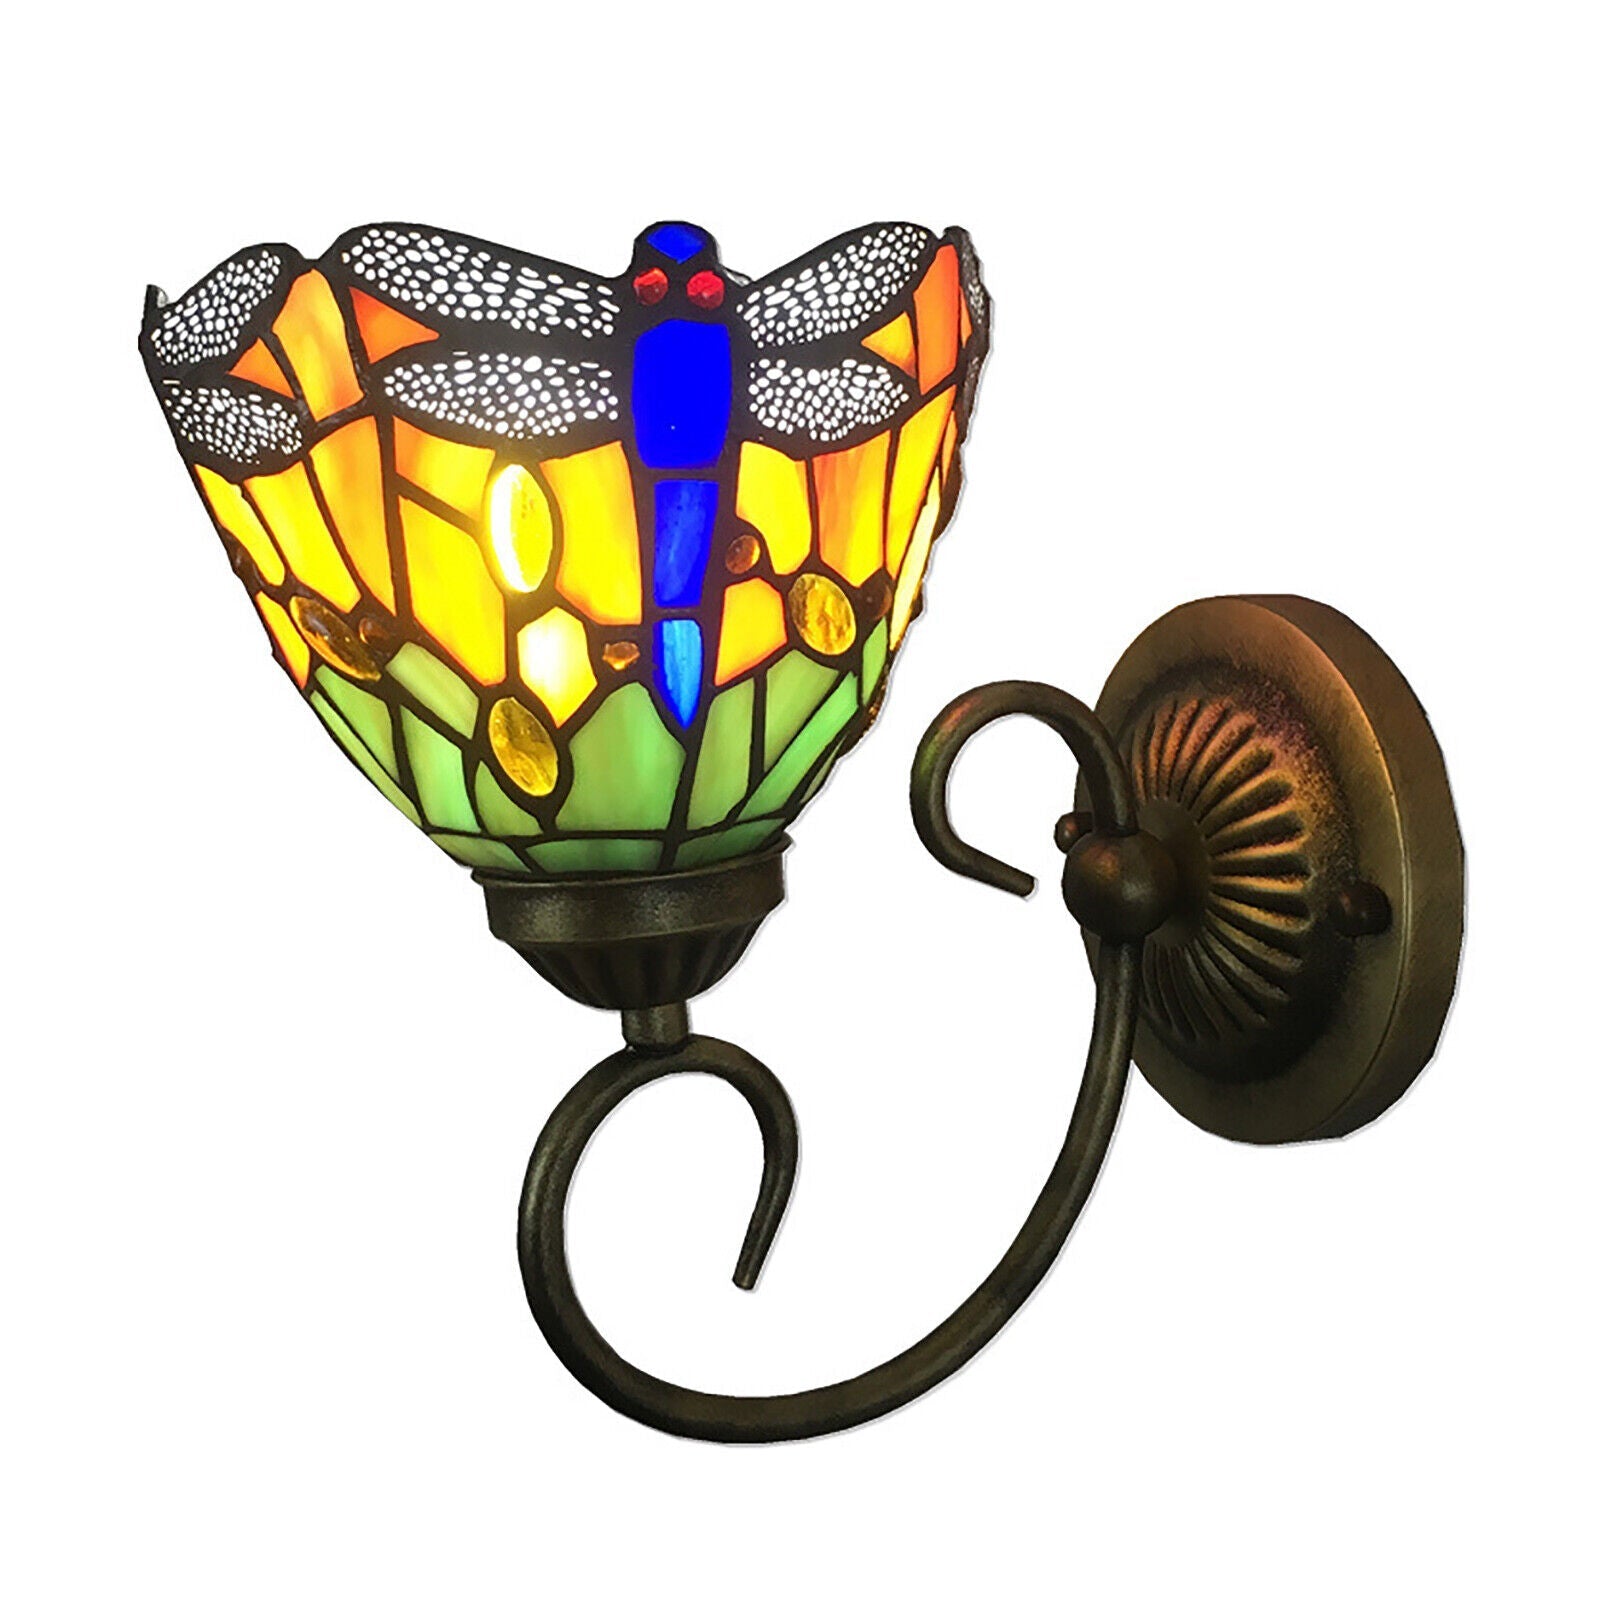  LED Wall Lamp Stained Glass Shade Hanging Light Fixture Large Design Suitable for Study Room Restaurant Bar E27 (Bulb Not Included)